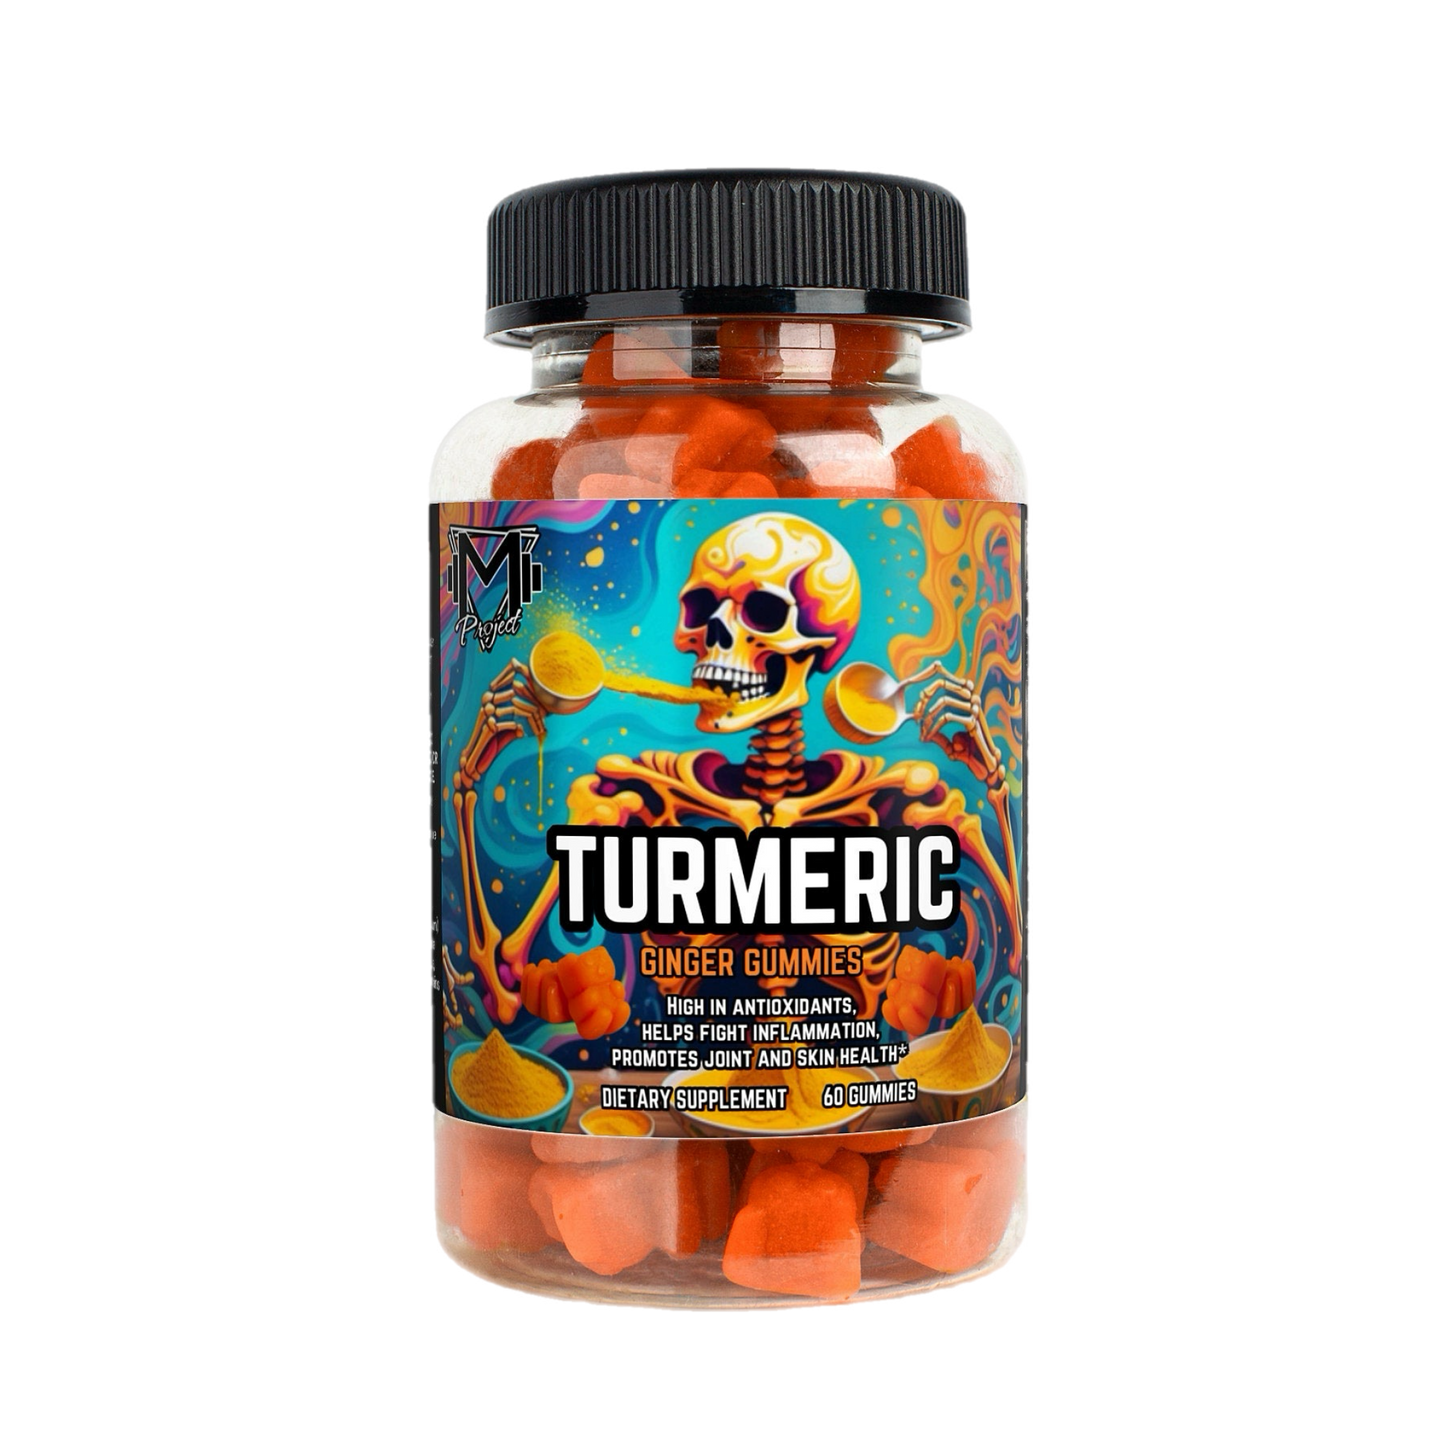 Turmeric Ginger Gummies by Project M